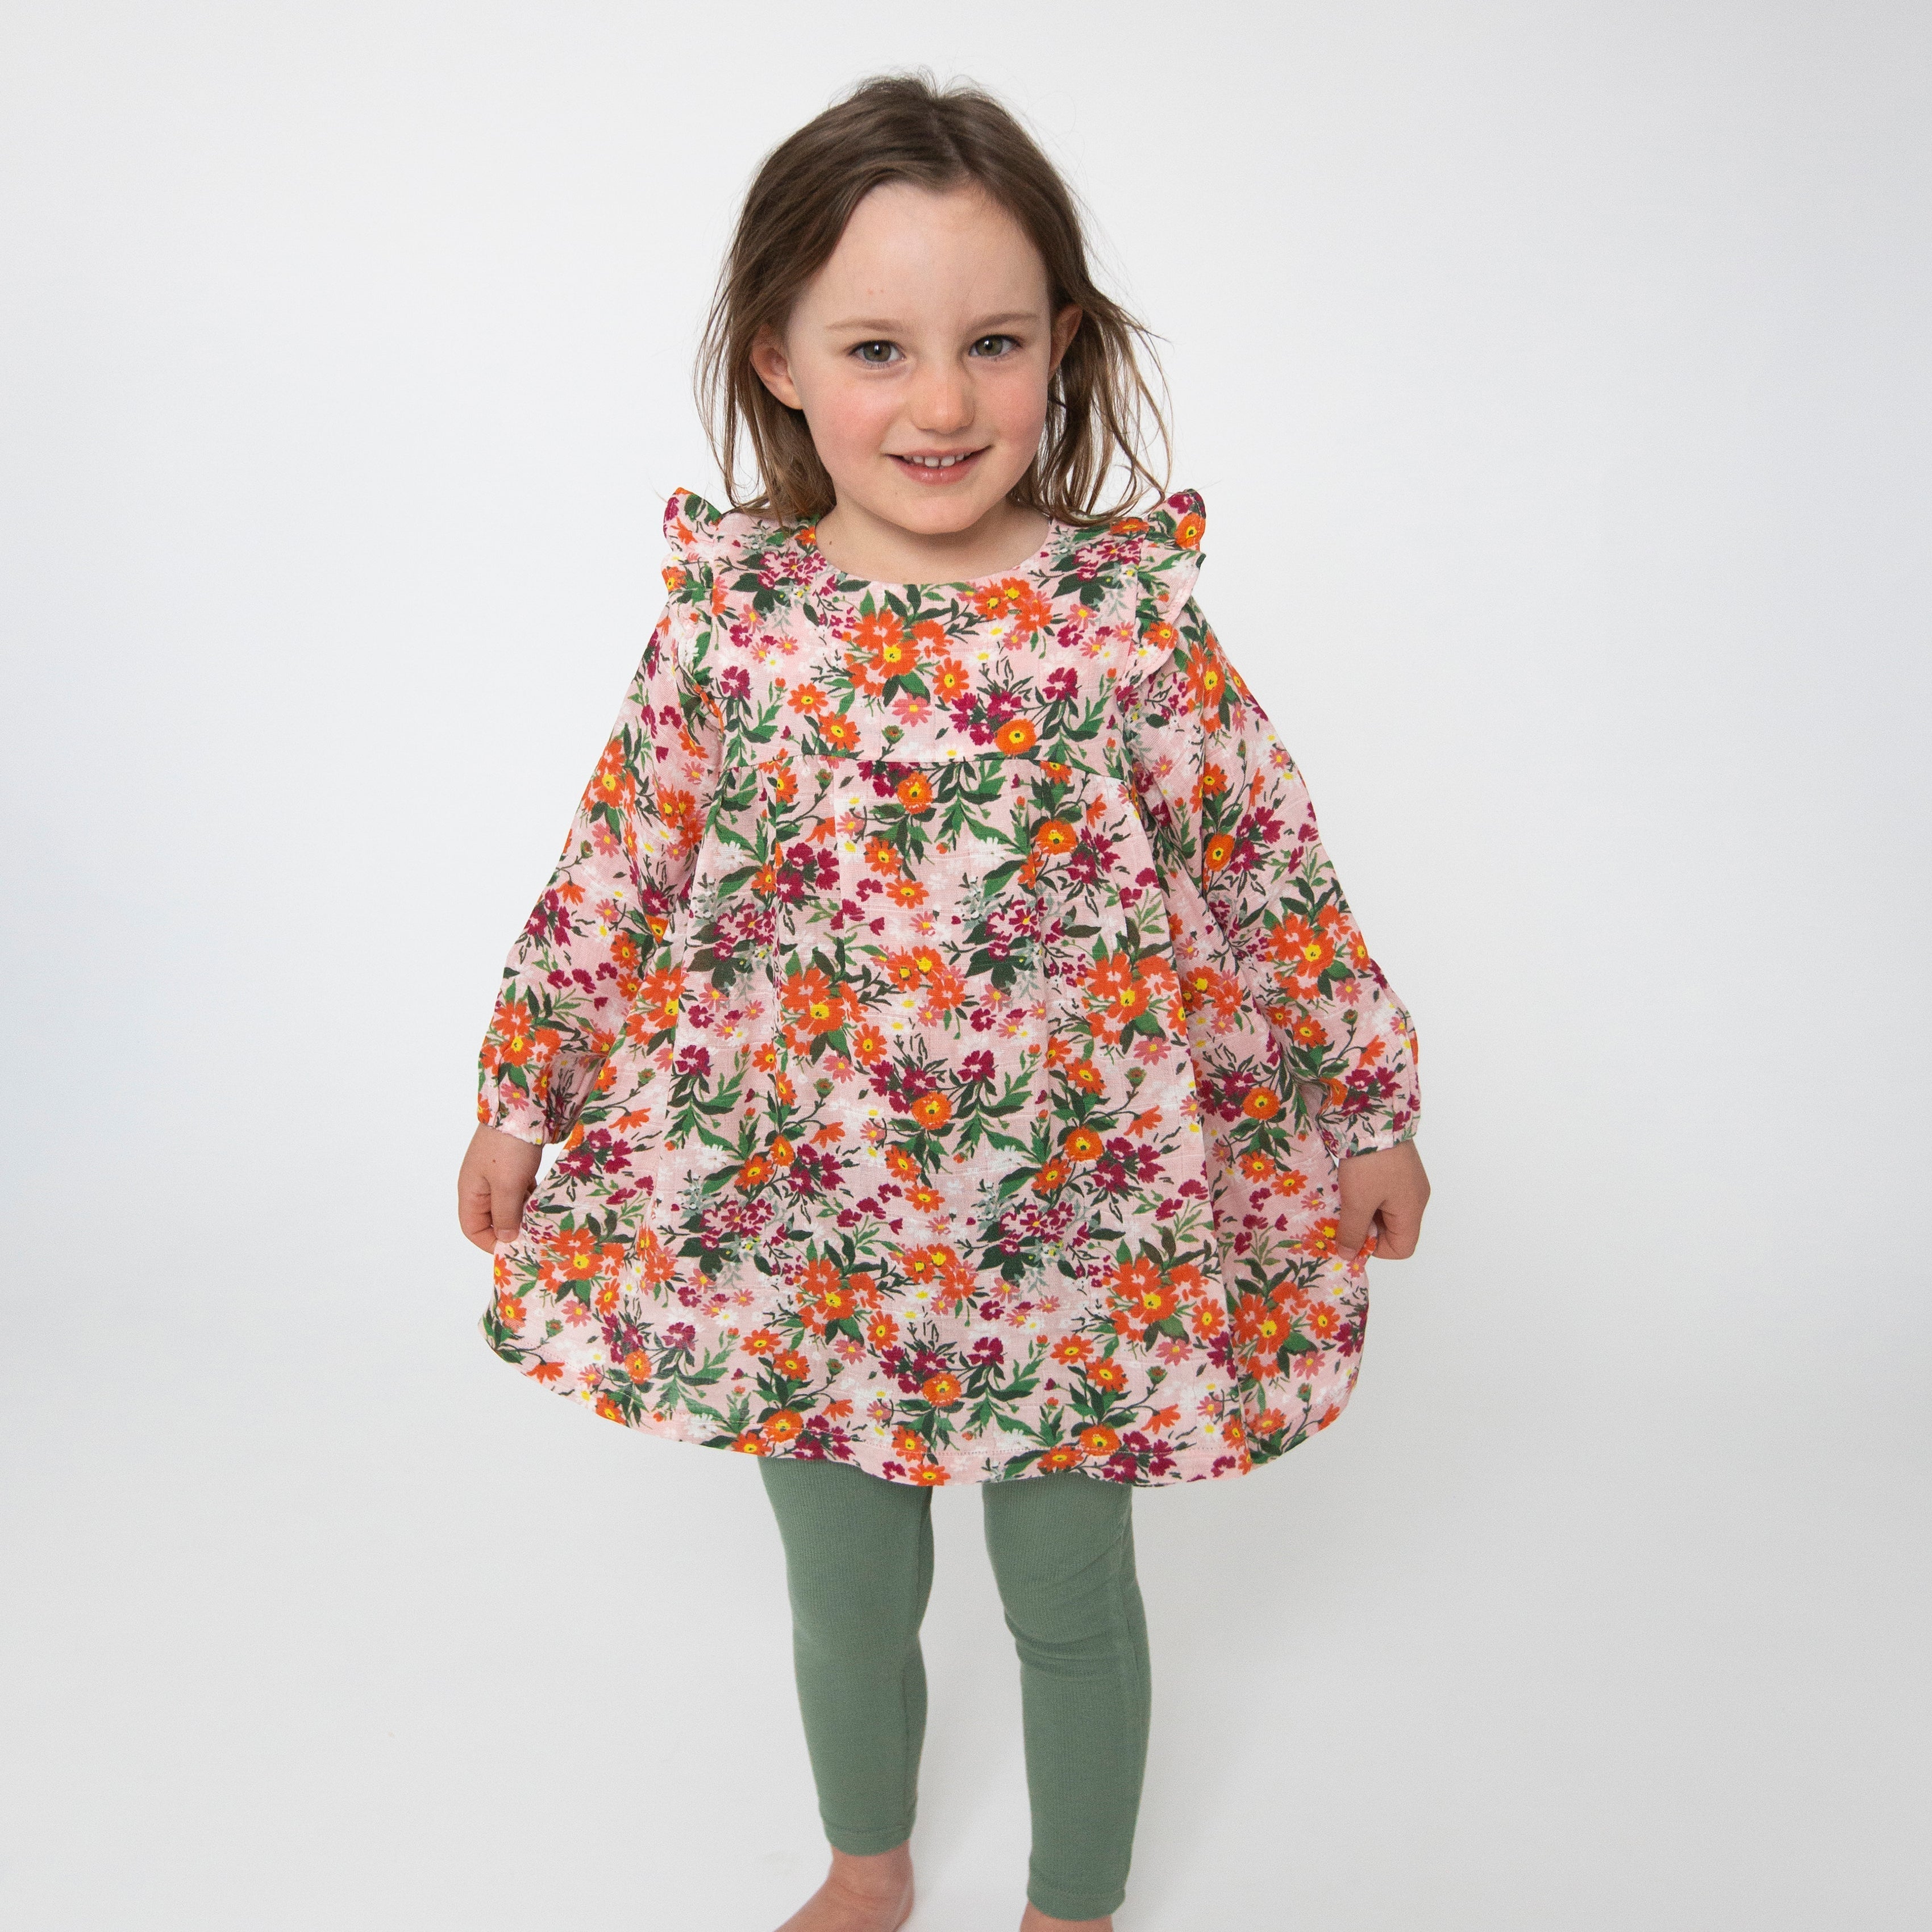 Ruffle Shoulder Dress And Legging - Autumn Days Floral